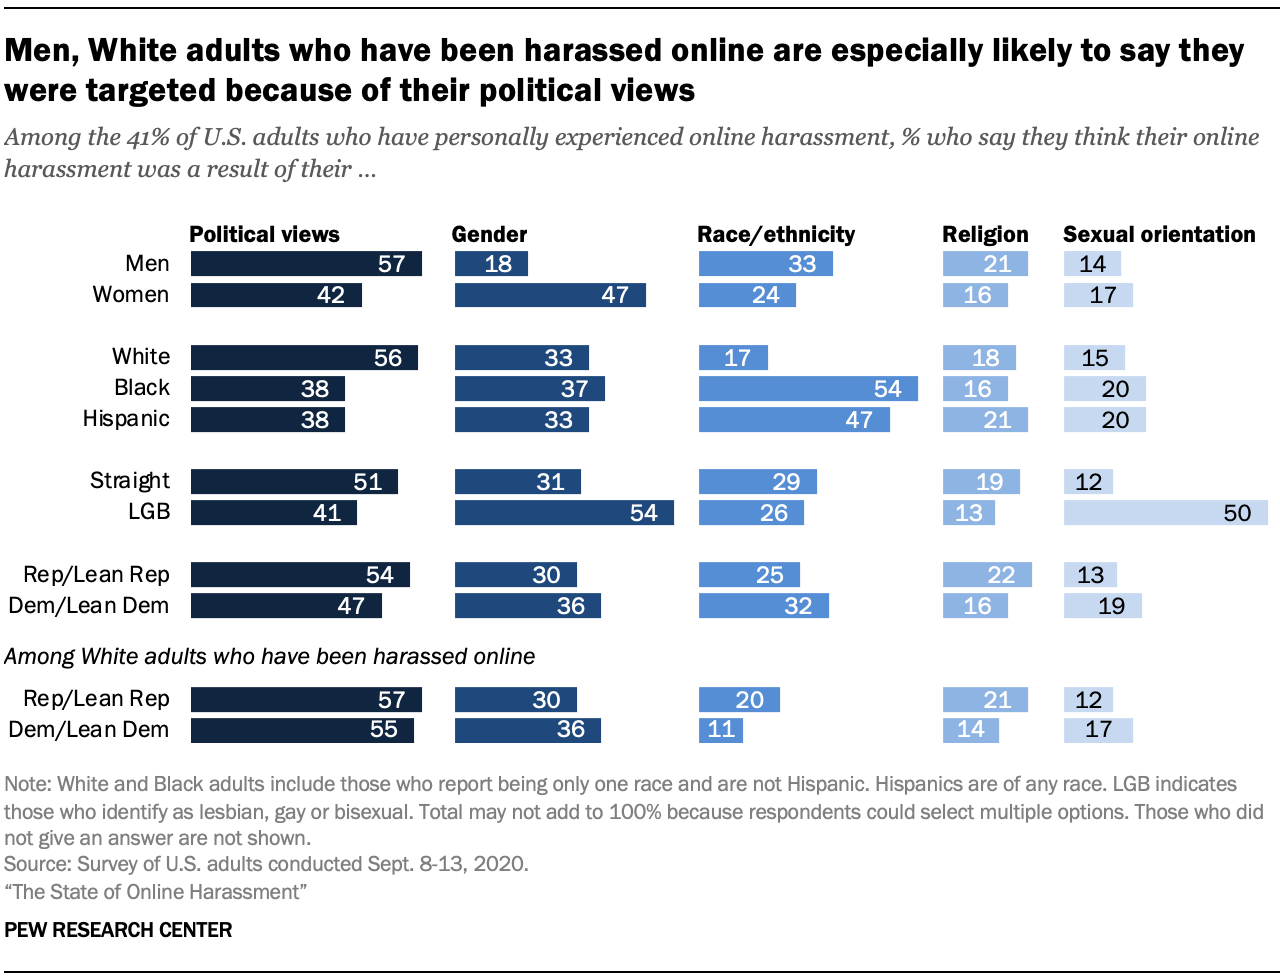 Men, White adults who have been harassed online are especially likely to say they were targeted because of their political views